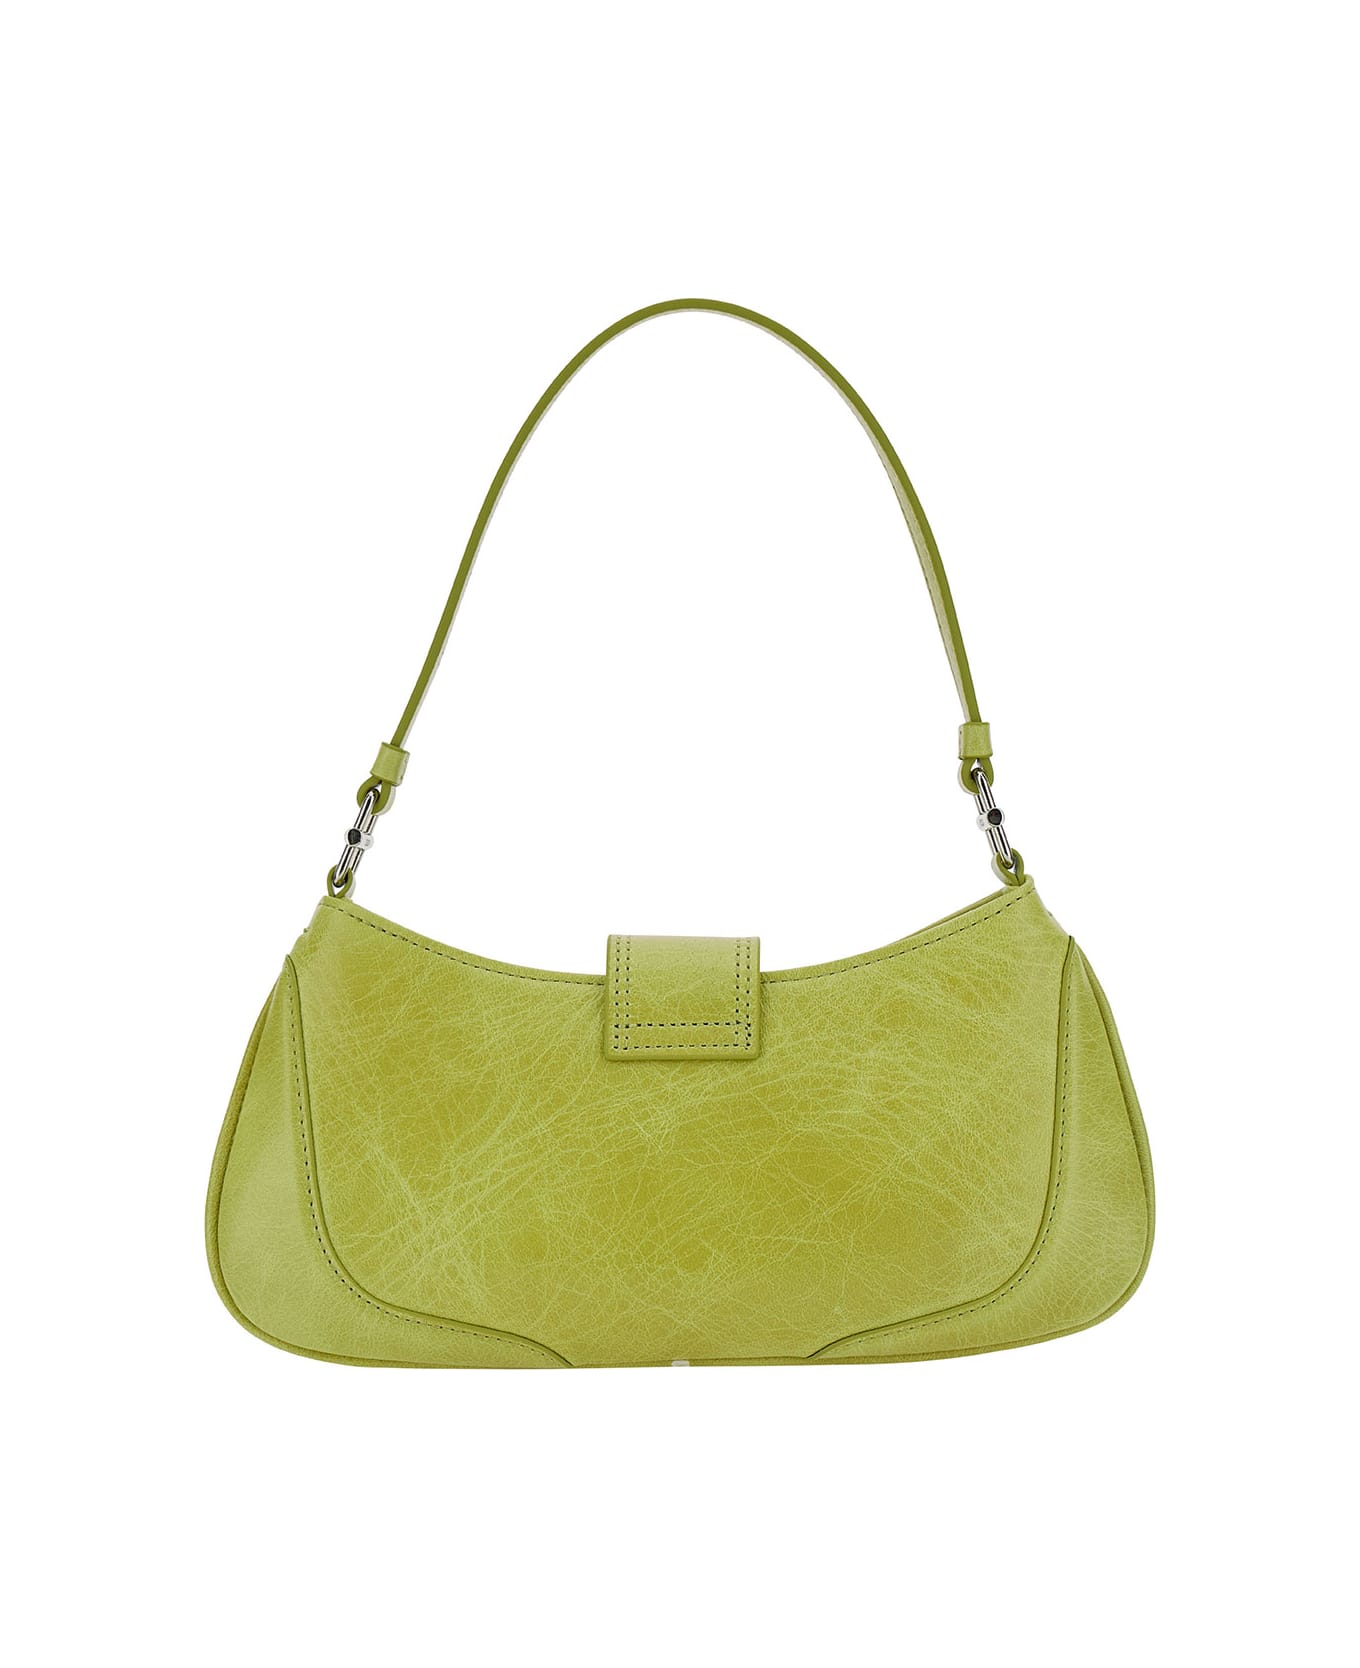 OSOI 'small Brocle' Yellow Shoulder Bag In Hammered Leather Woman - Yellow